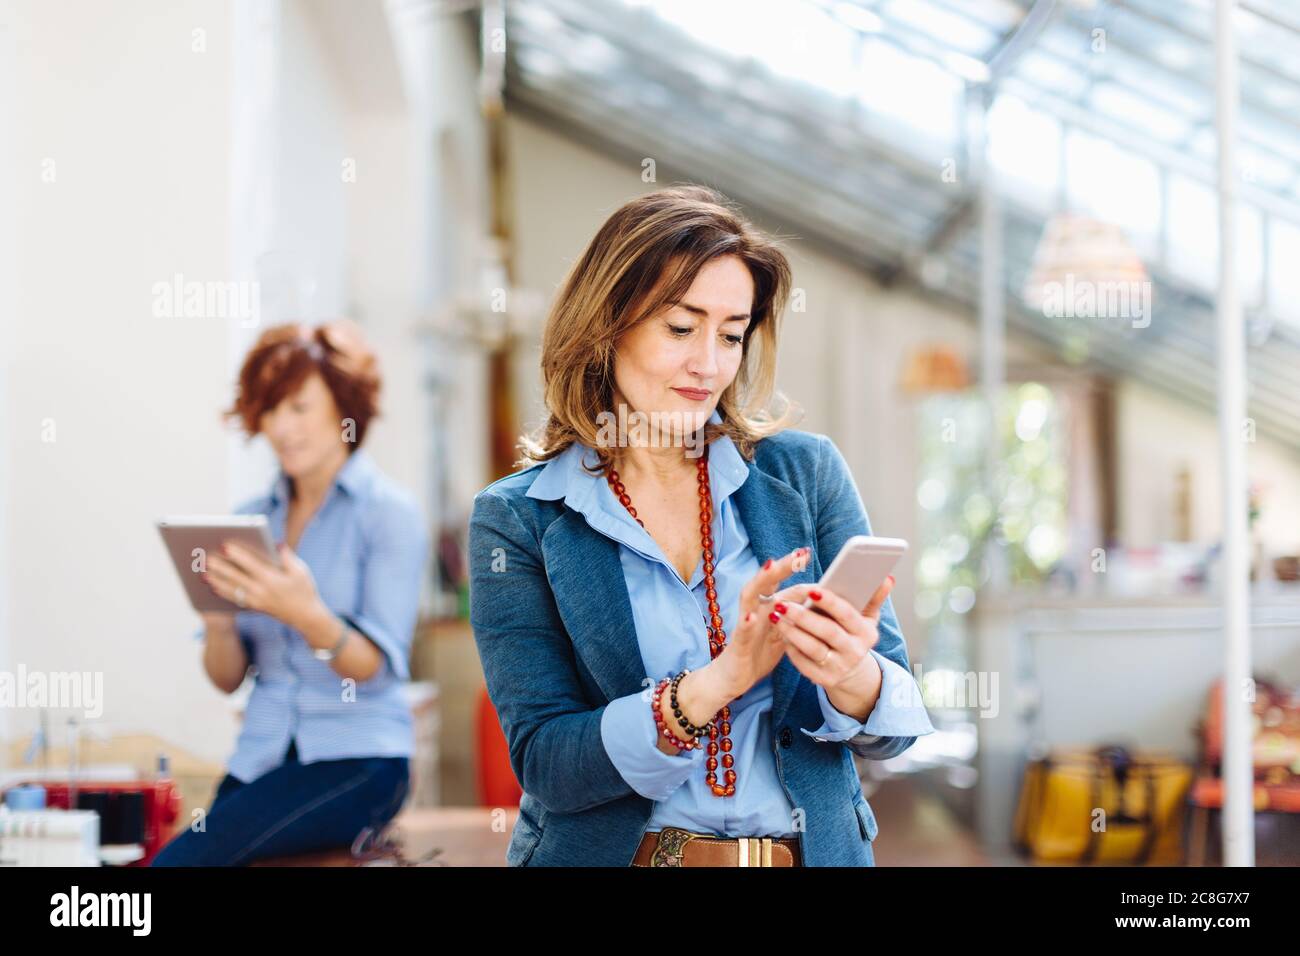 Two women, in creative studio, using digital tablet and smartphone Stock Photo